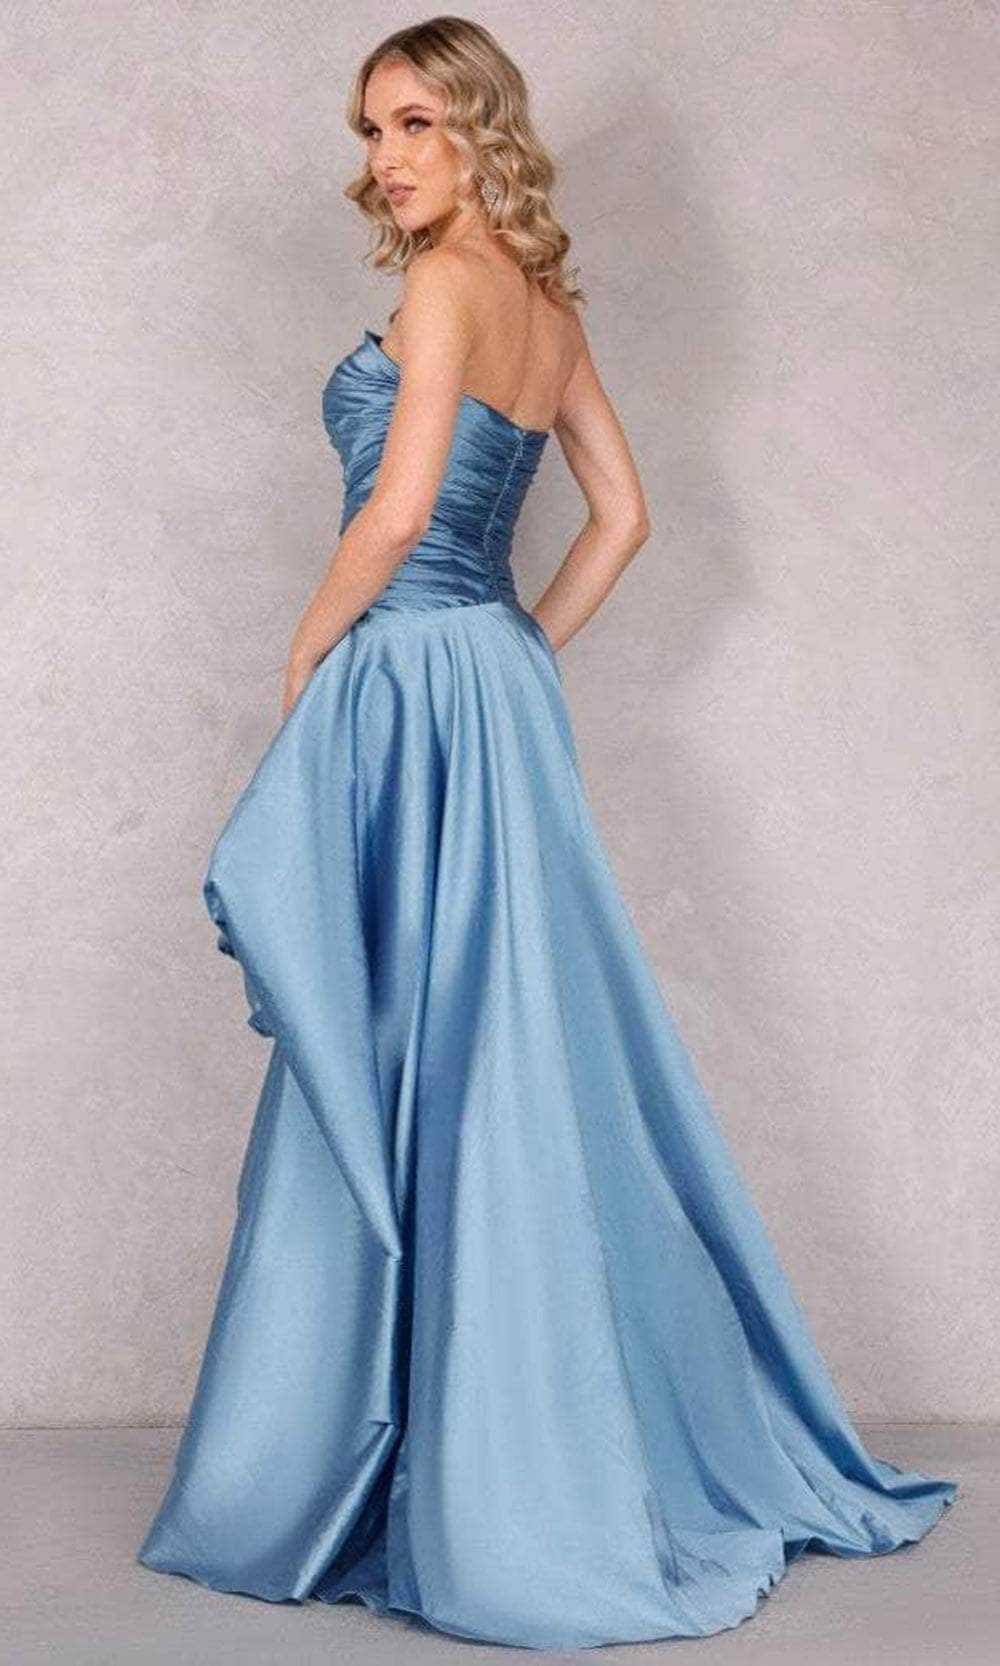 Terani Couture, Terani Couture 2111P4270 - Strapless Ruffle A-Line Evening Gown